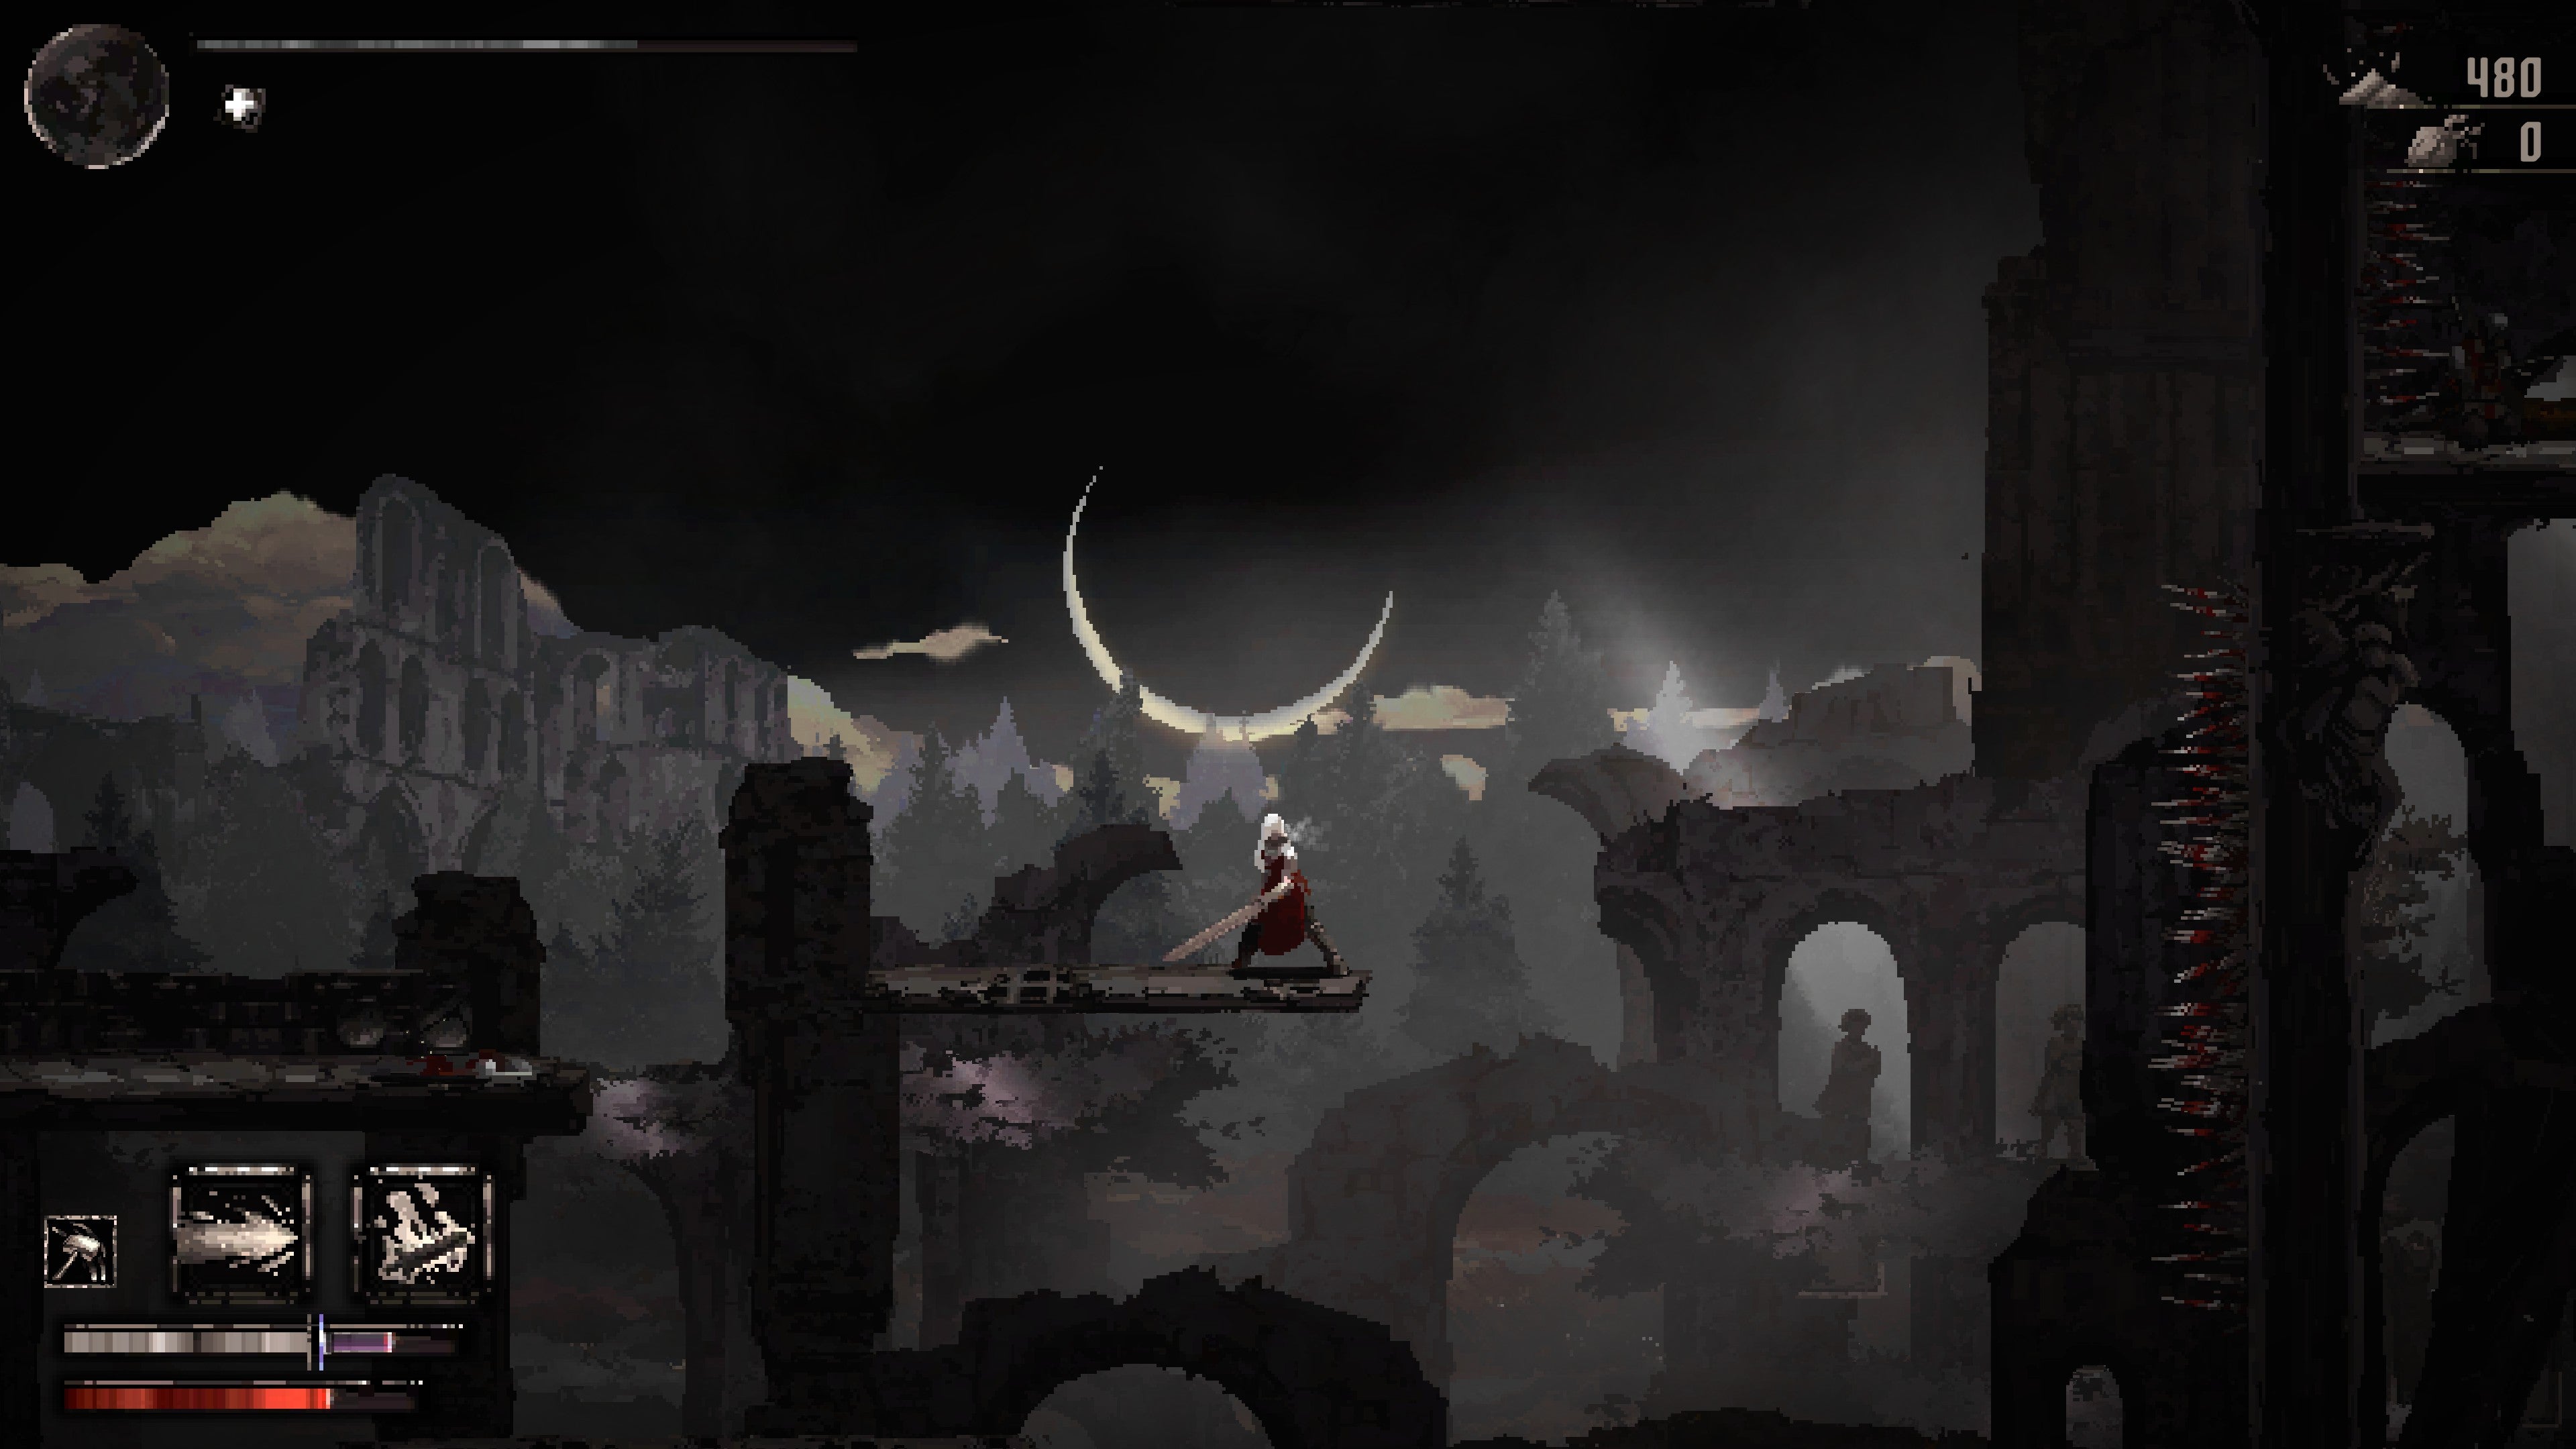 A white haired warrior stands on a tower with a crescent moon in the background in Moonscars.